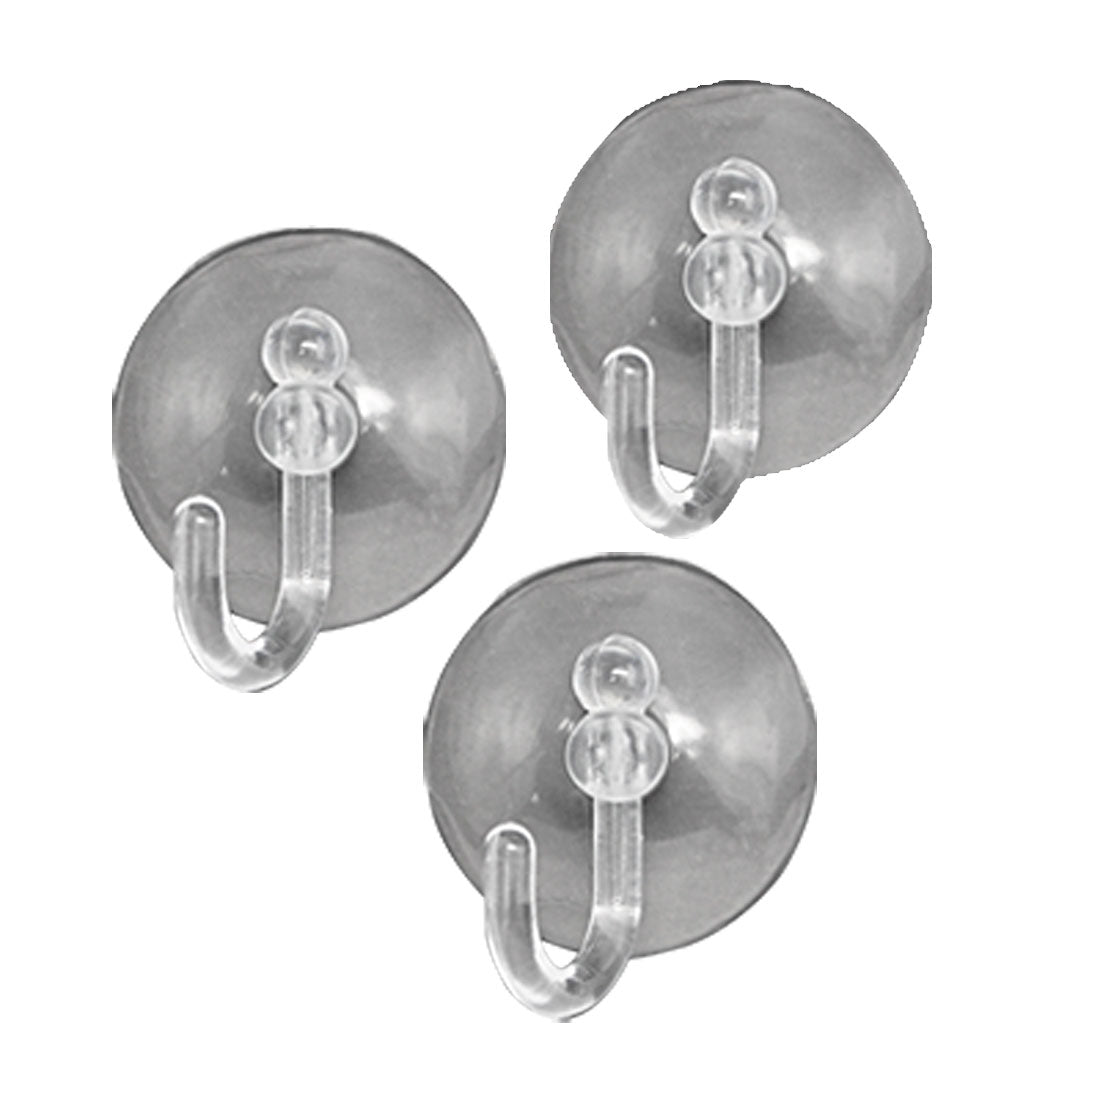 uxcell Uxcell Clear Briefness Design Suction Cup Adhesion Hook 3PCs